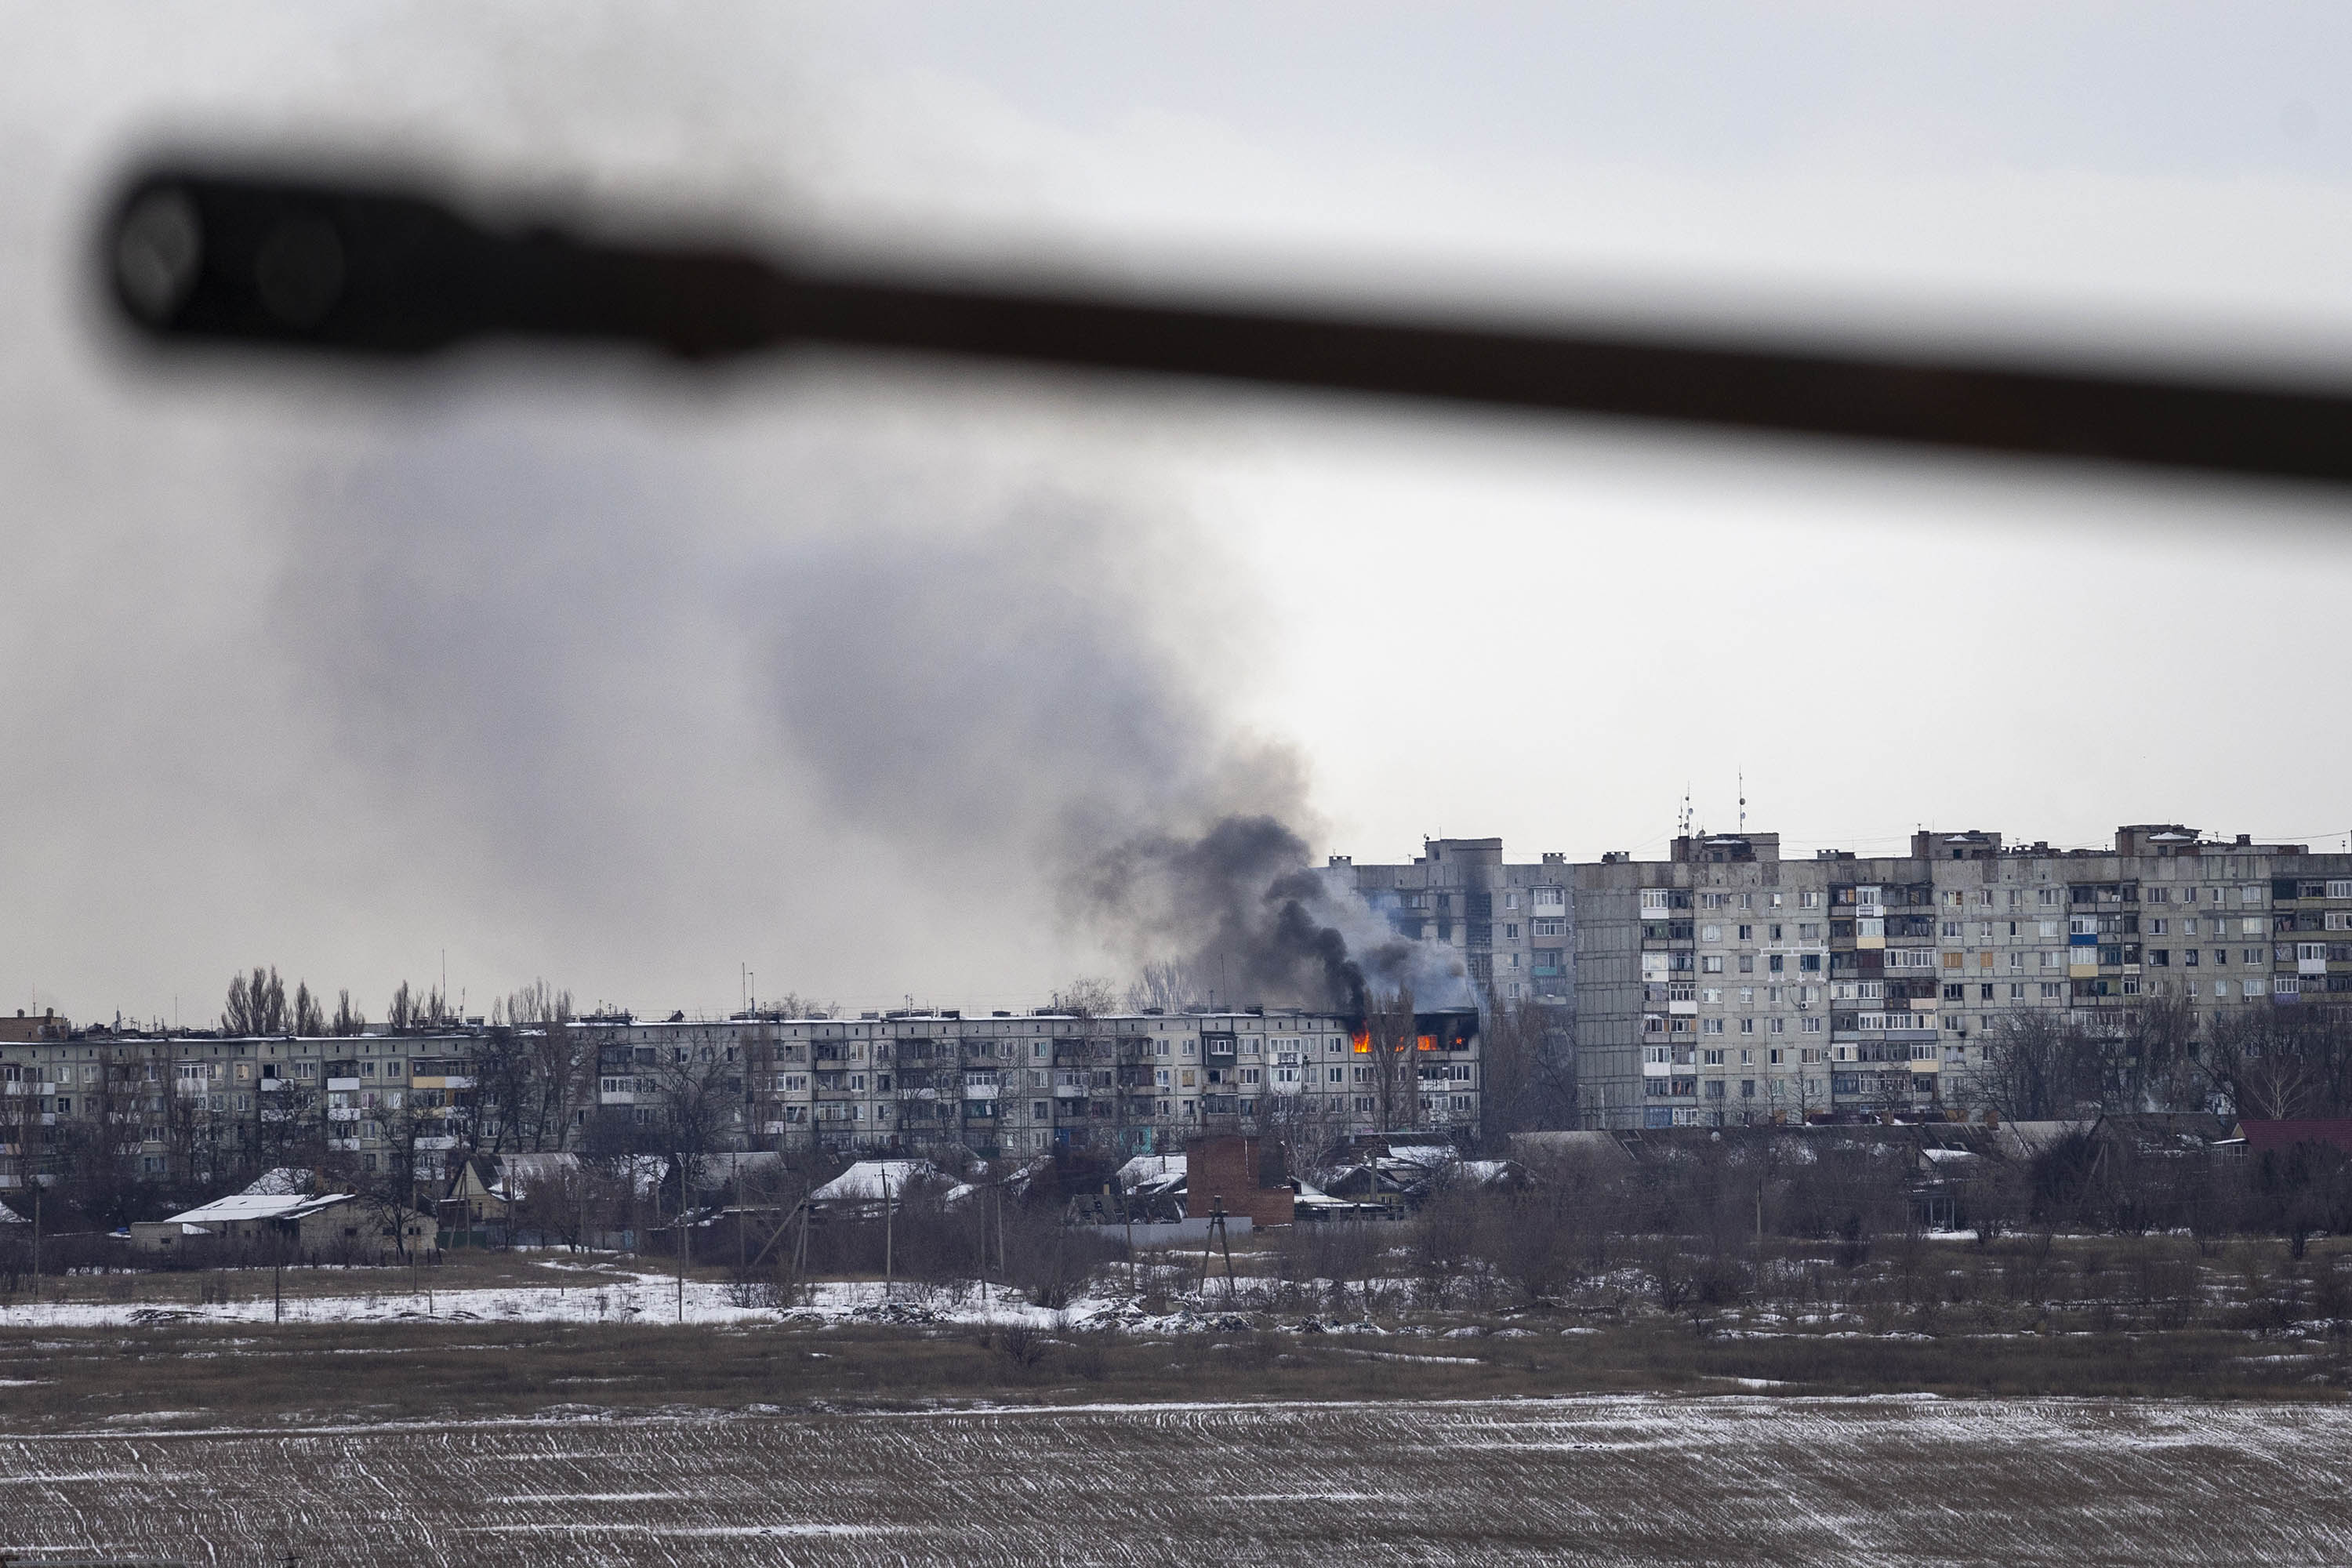 A Ukrainian military vehicle drives by as an apartment building hit by Russian artillery burns in the distance on February 14, in Bakhmut, Ukraine.